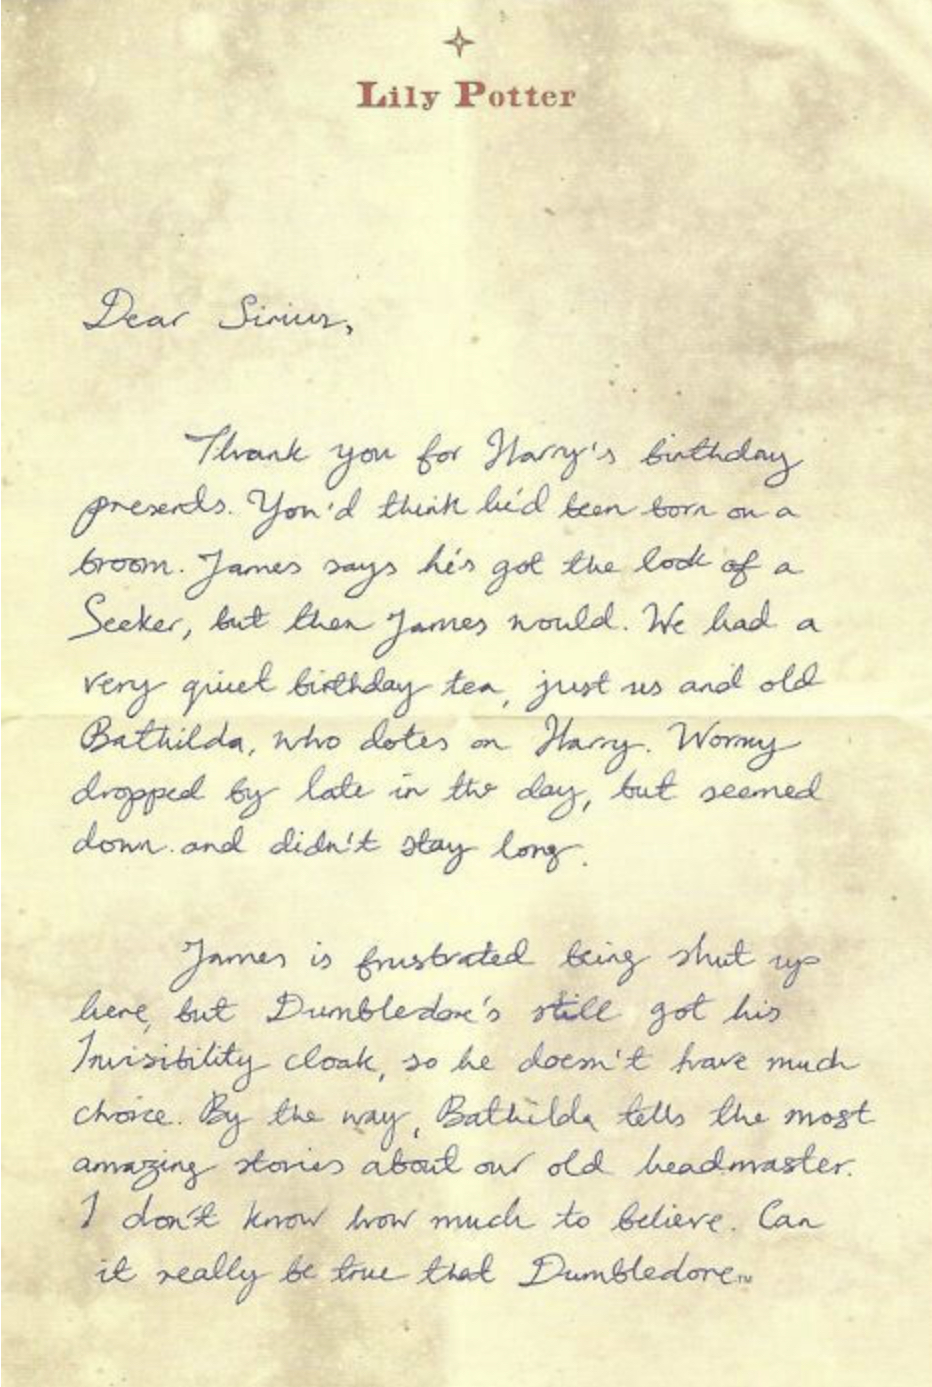 Personalized Letter From Hermione Granger. 